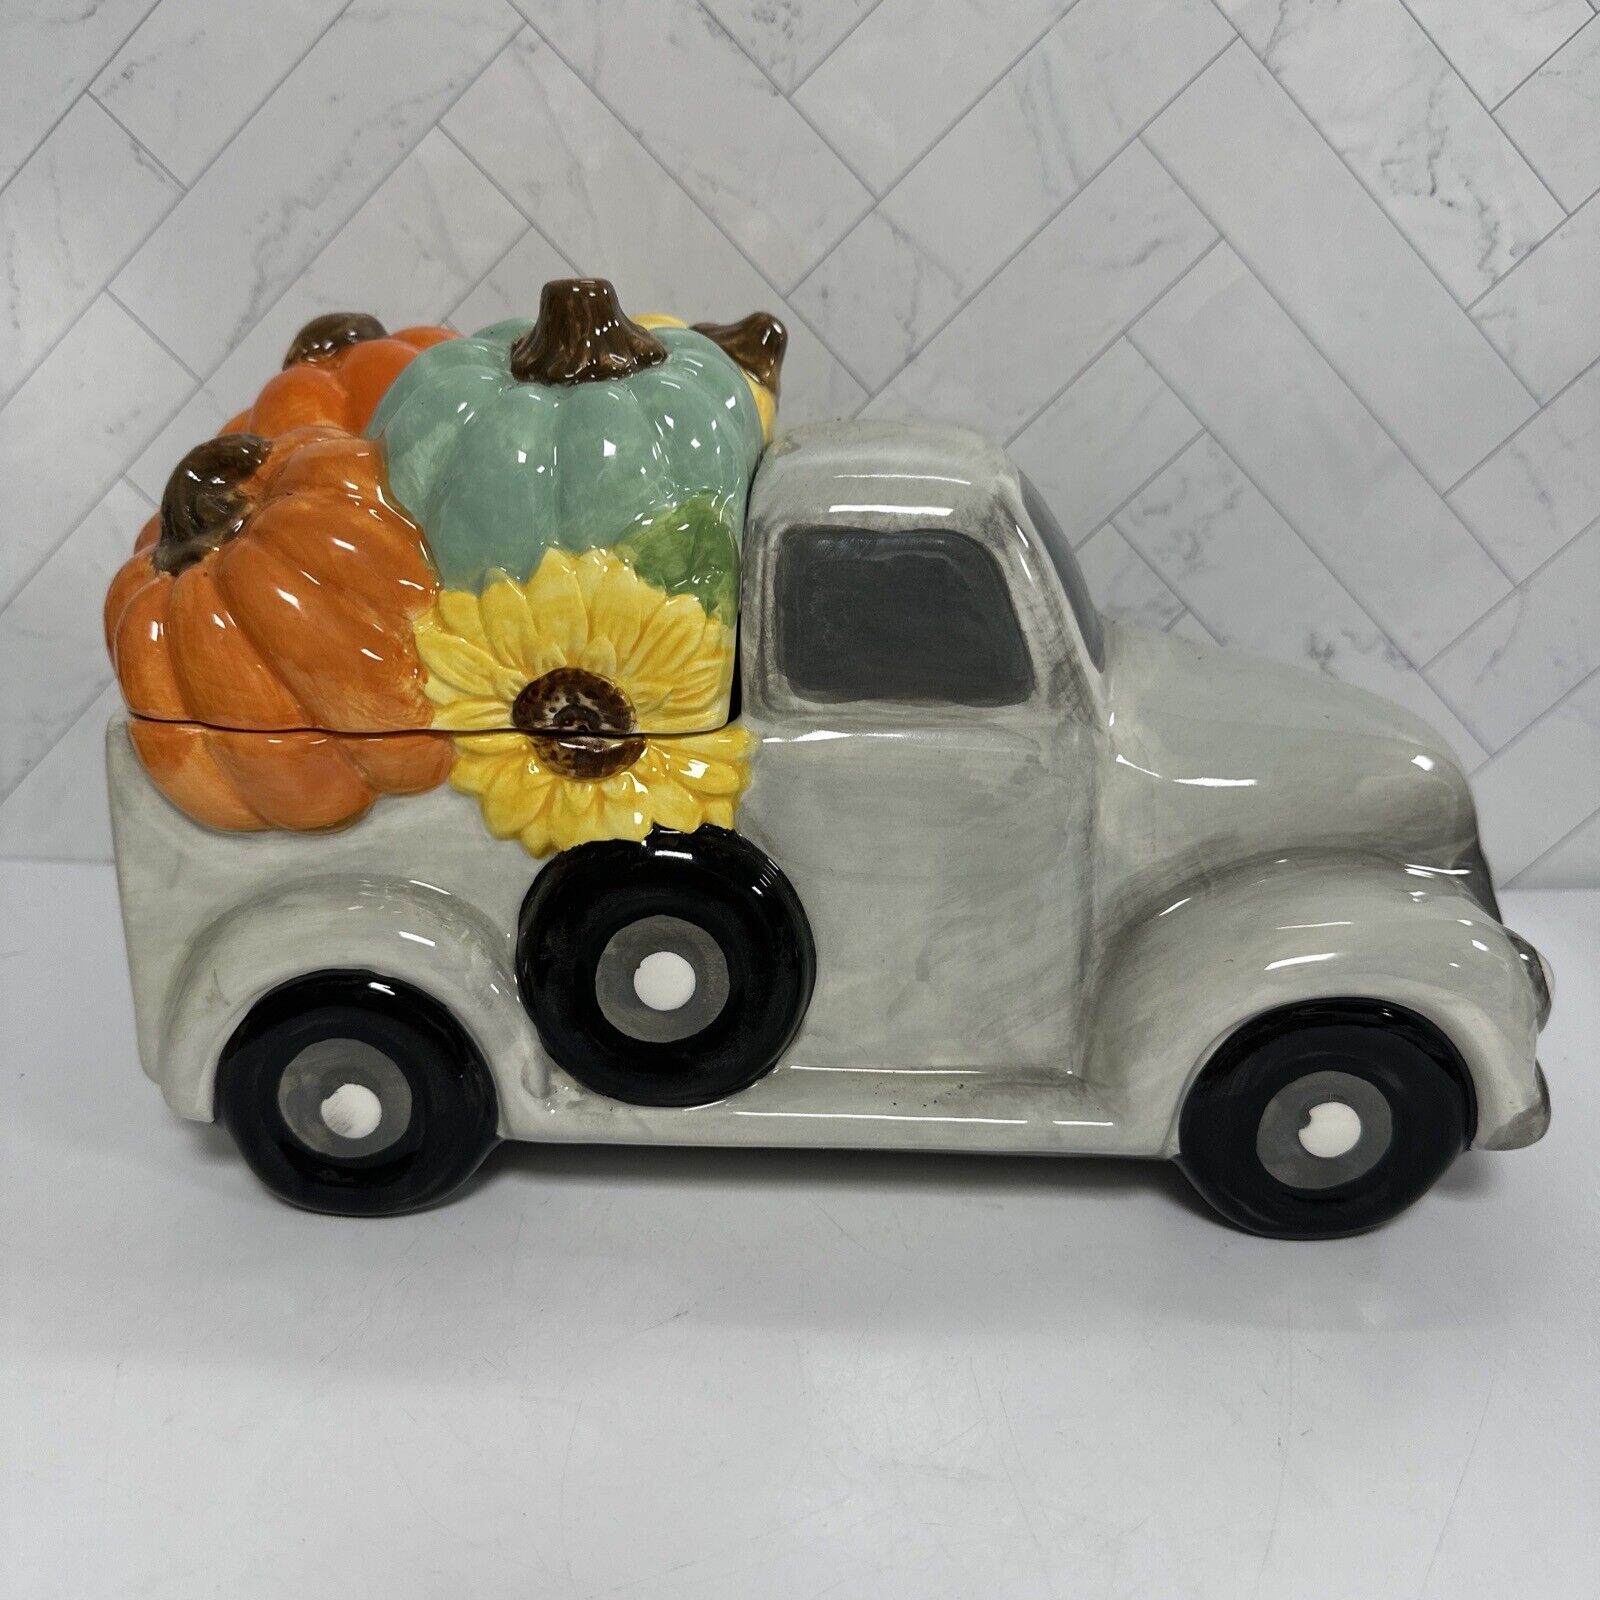 Hobby Lobby Ceramic Truck Container Planter Candy Decor Gray Multi Color Pumpkin